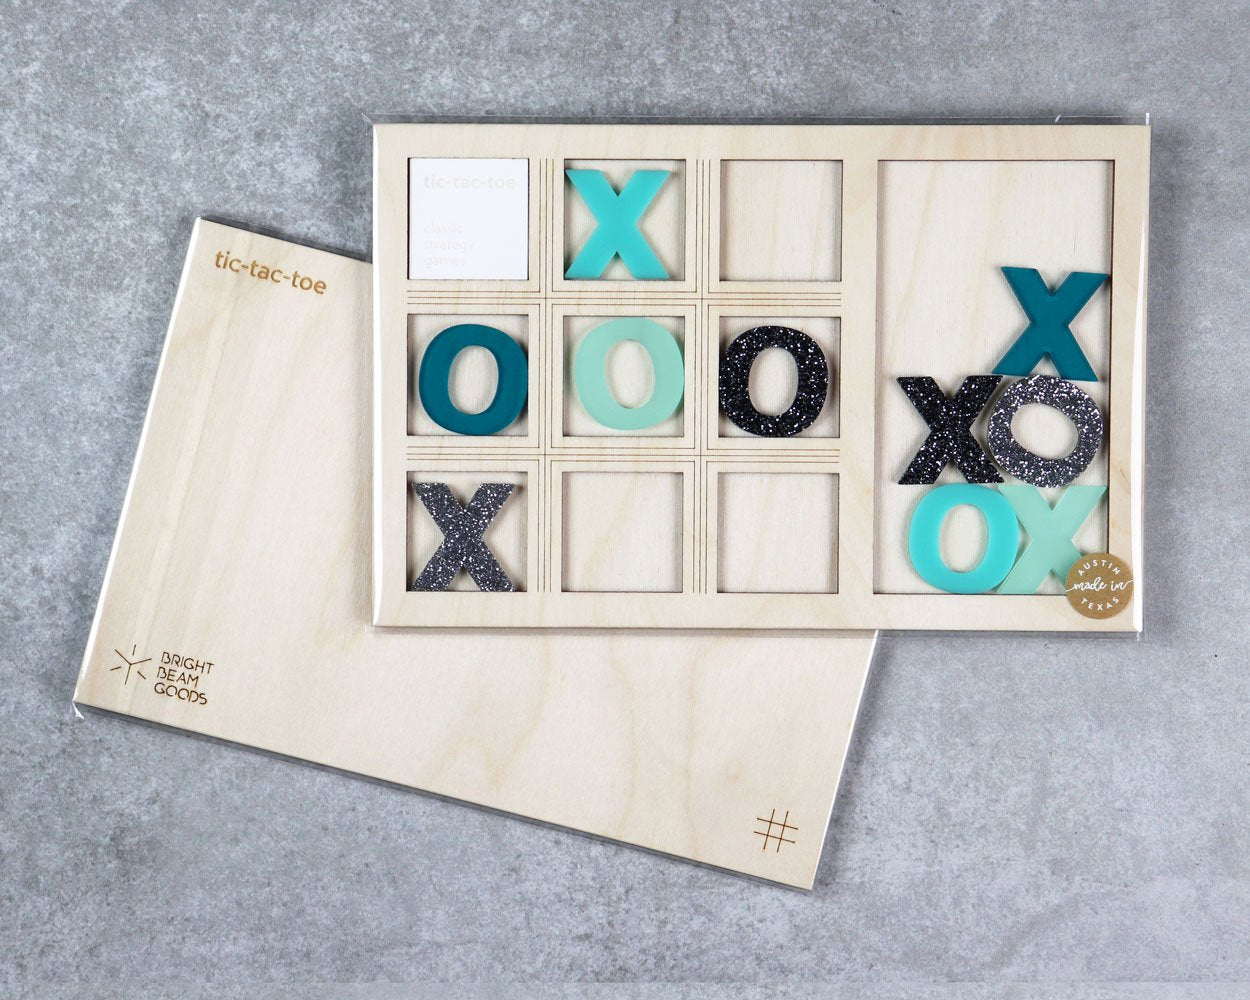 Galaxy tic-tac-toe game in packaging